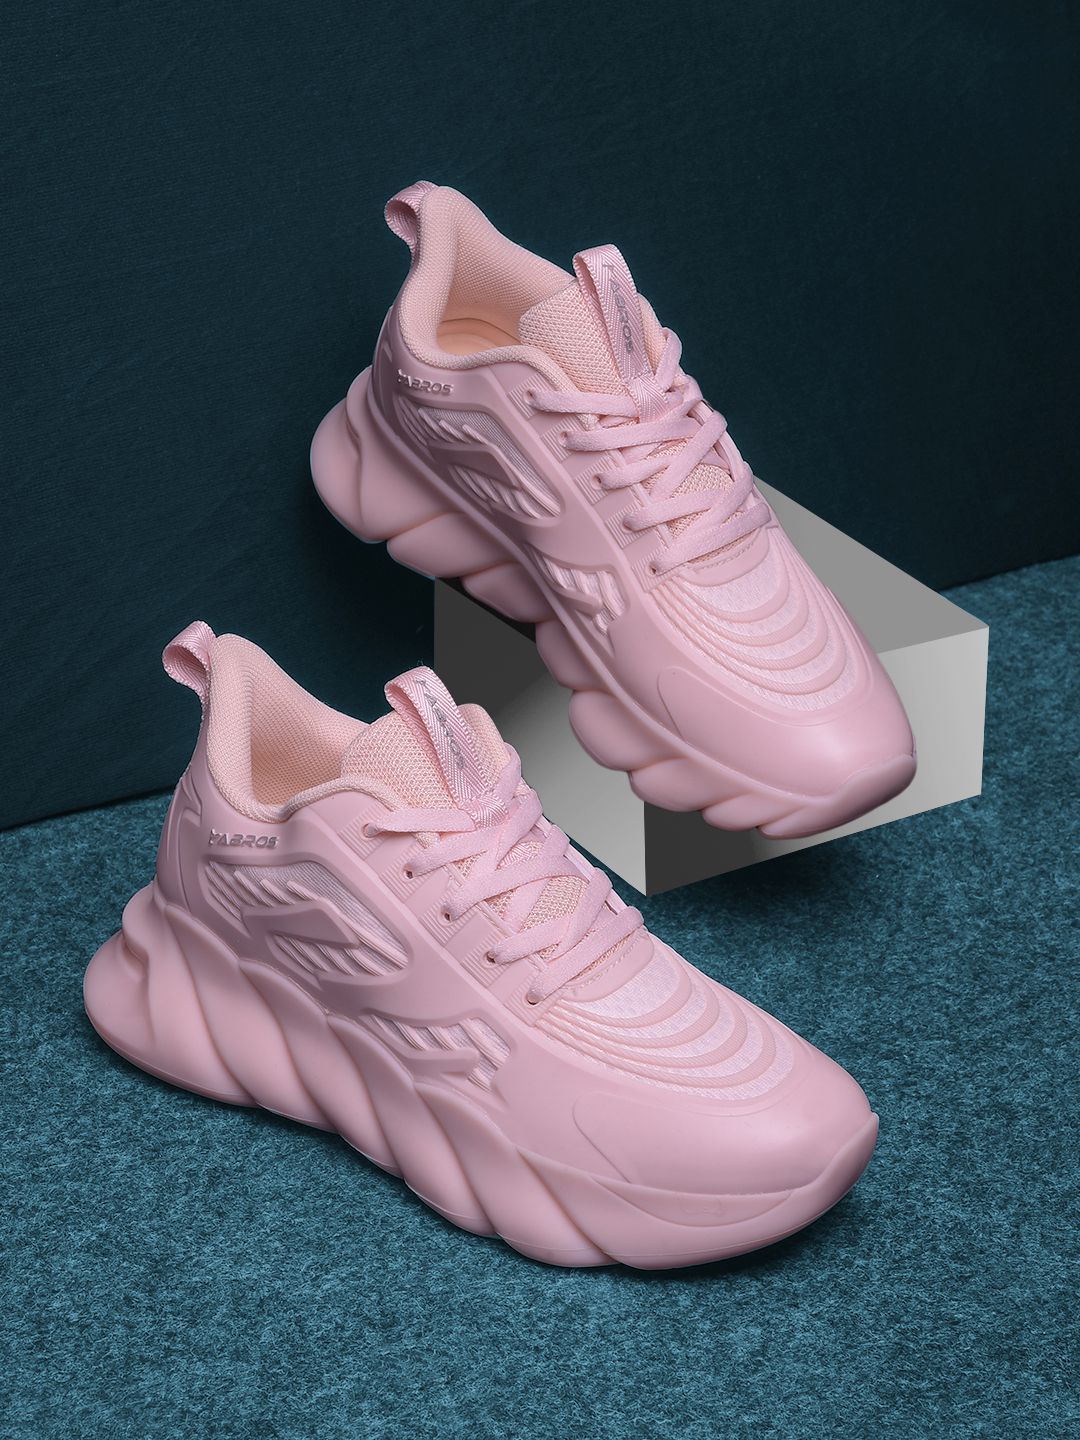     			Abros - Pink Women's Running Shoes